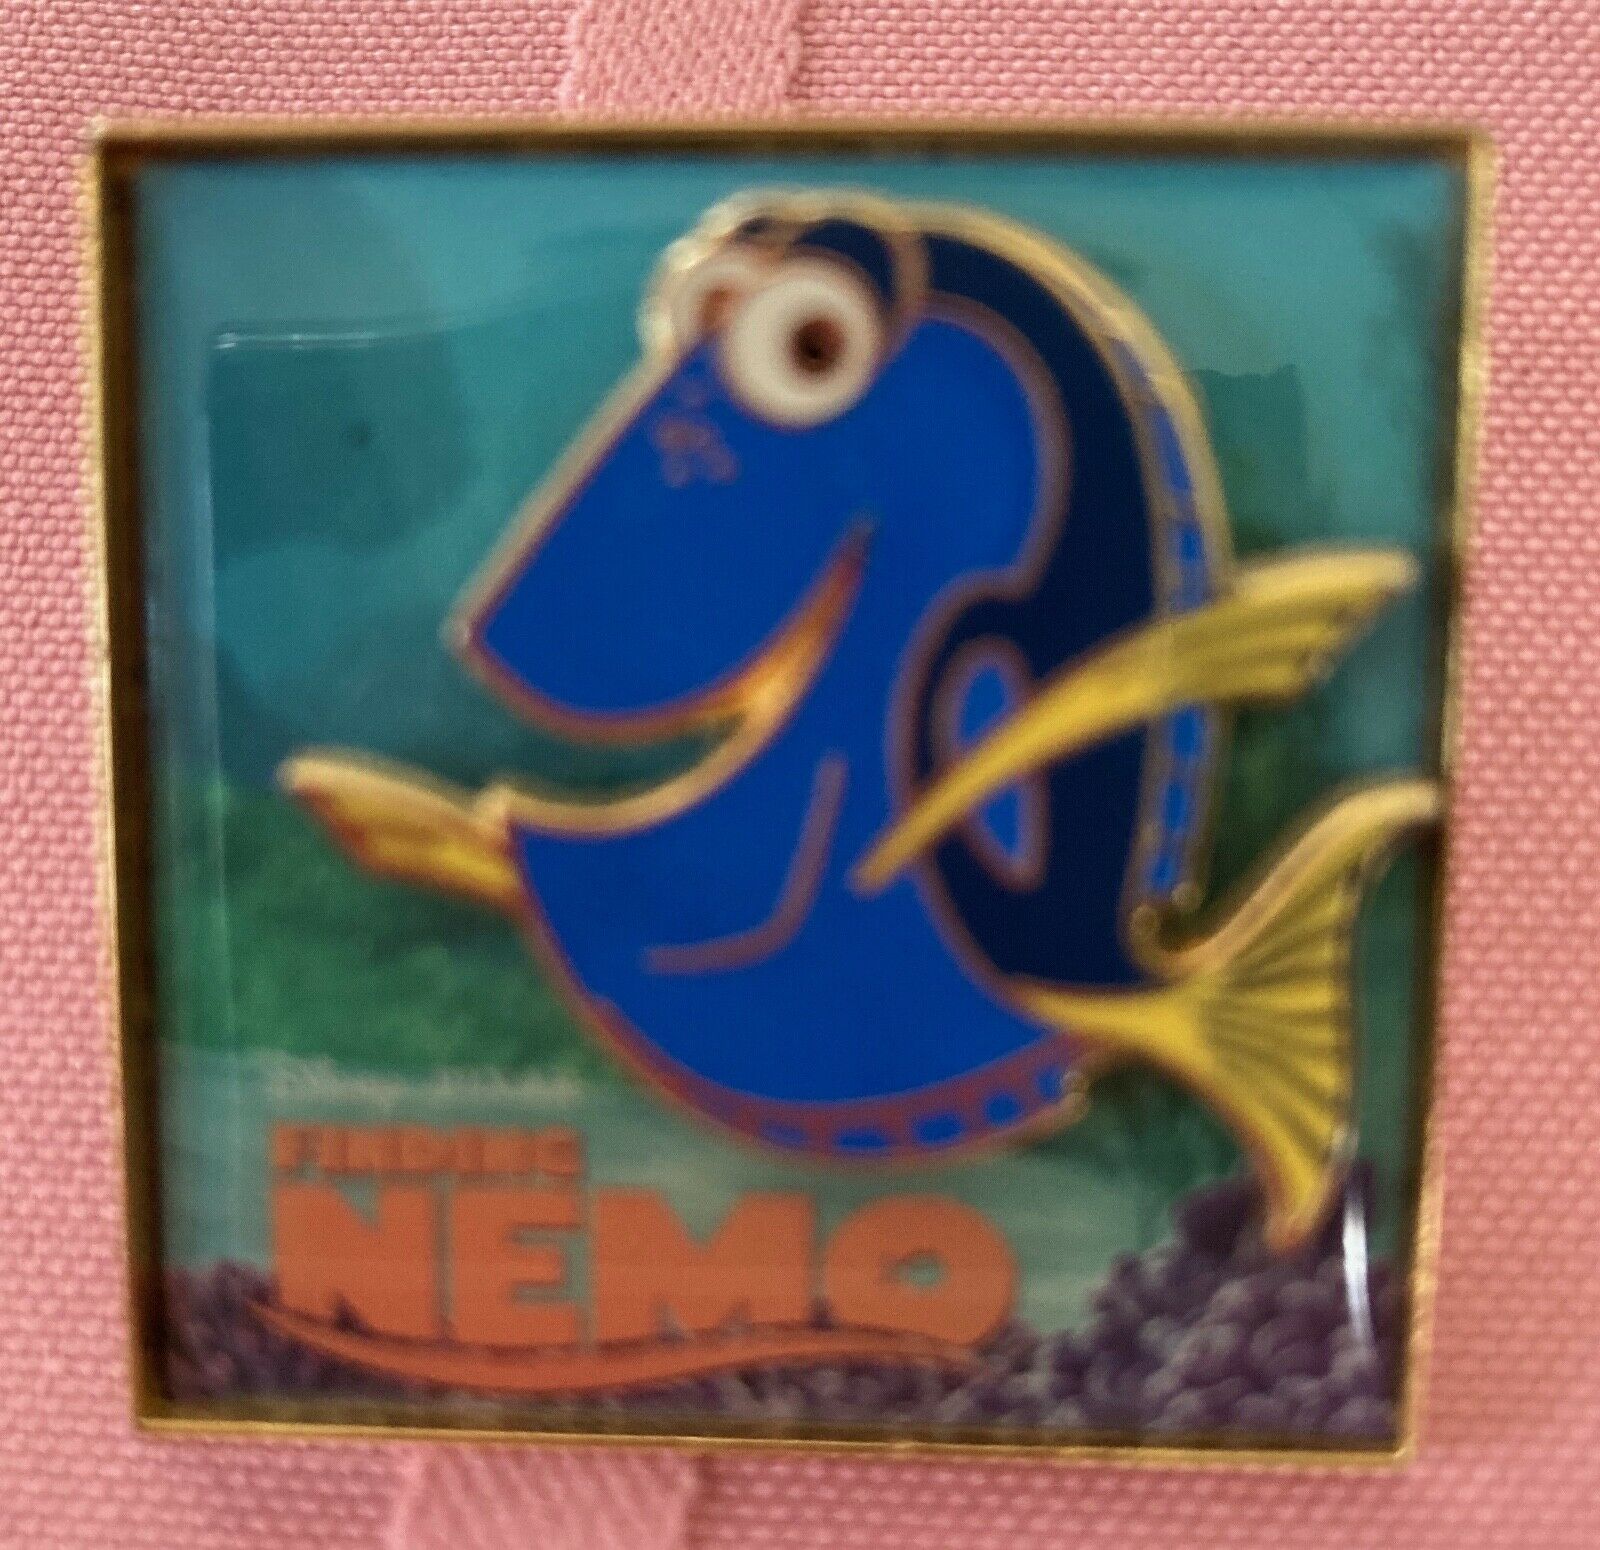 Disney Official Trading Pin, Finding Nemo, Dory 2003, Excellent Condition